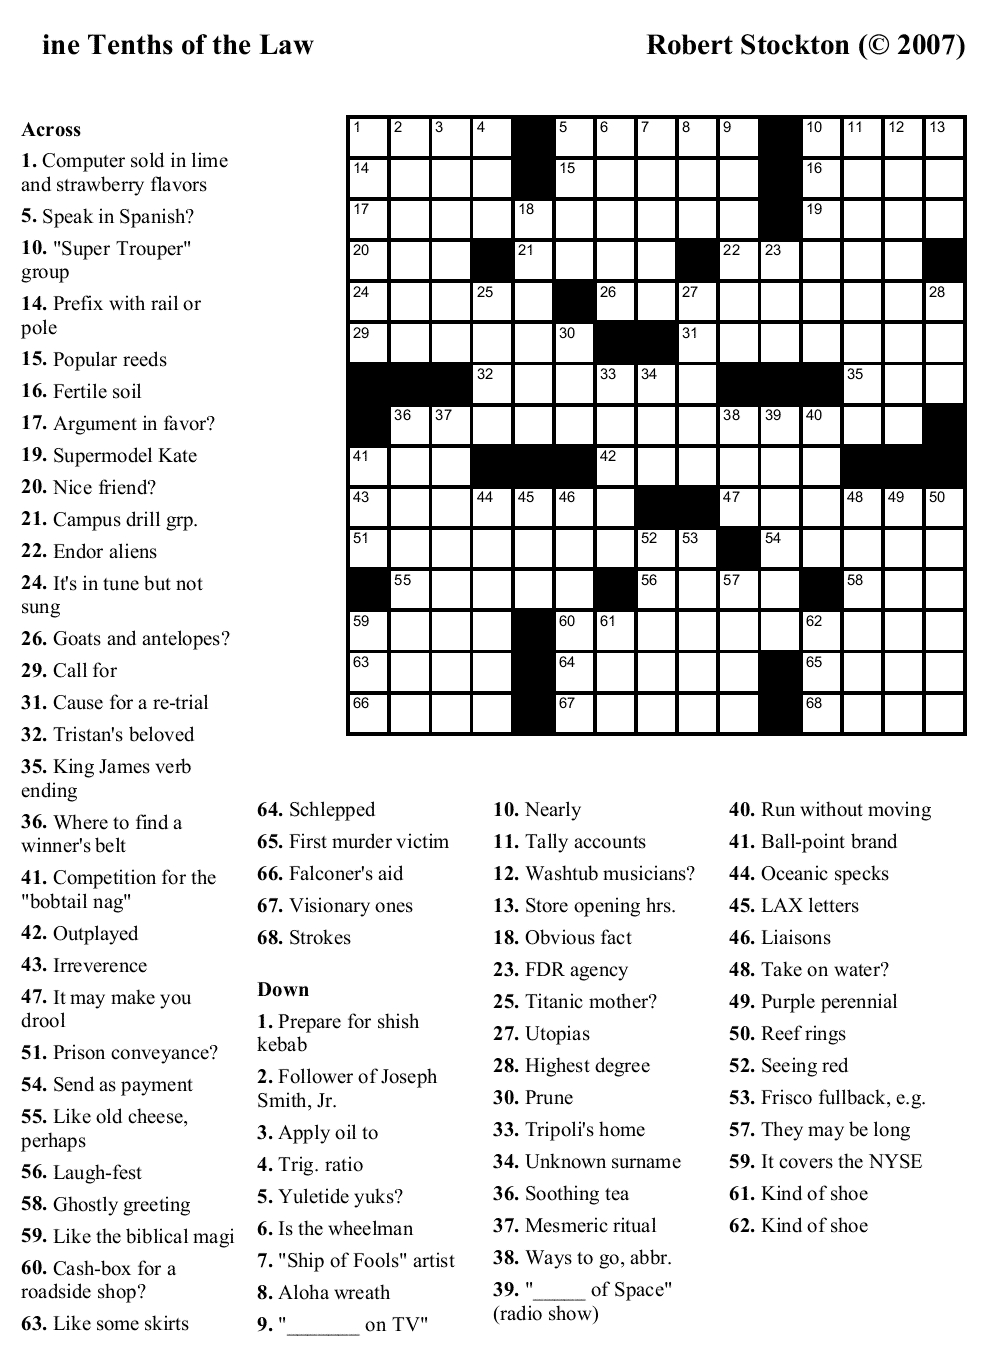 Crossword Puzzles Printable - Yahoo Image Search Results | Crossword - Printable Crossword Puzzles About Love